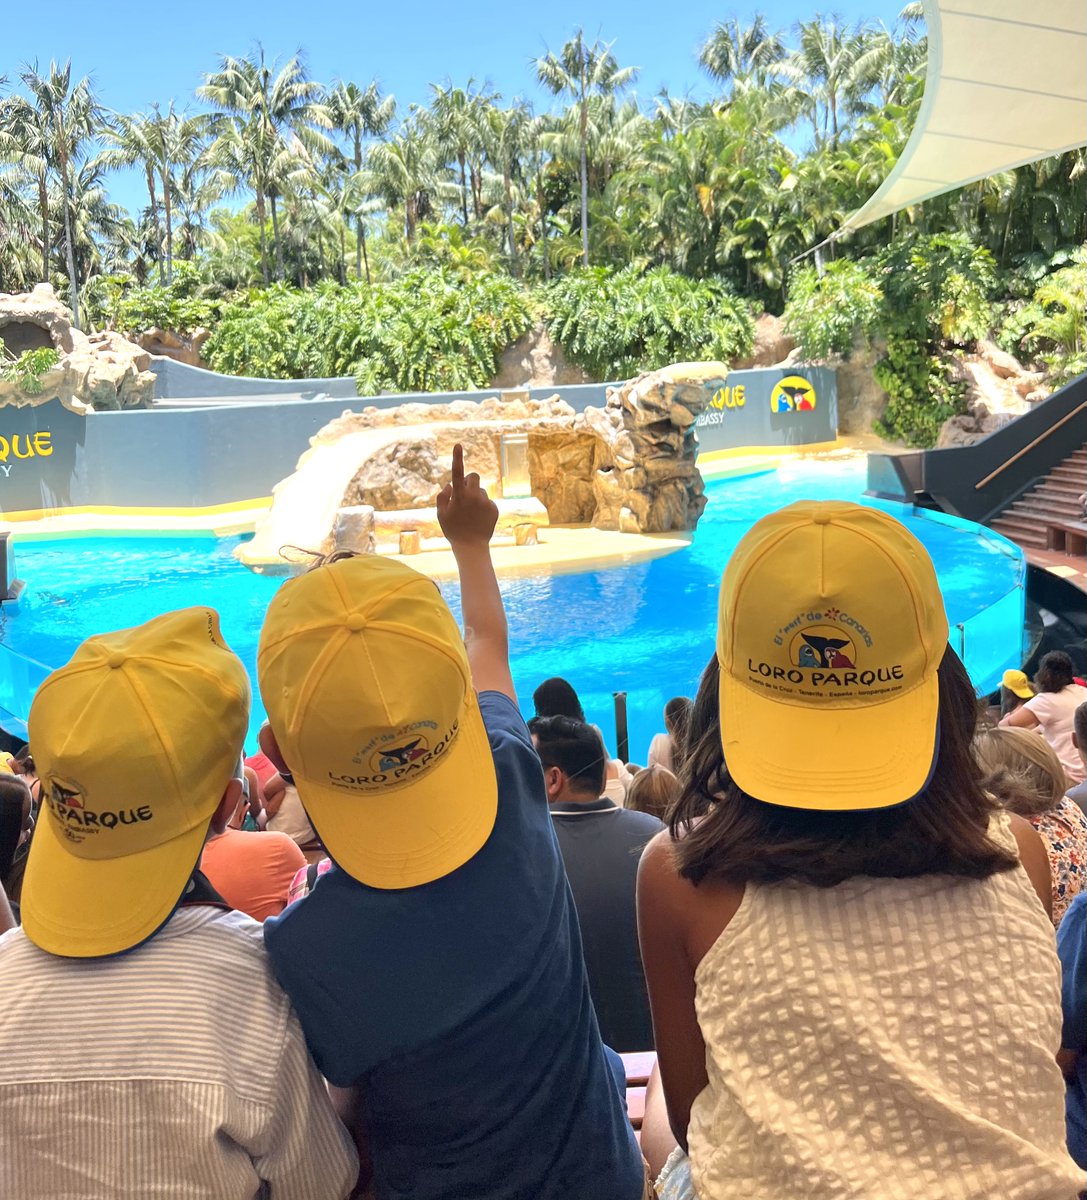 The environmental education work that we carry out in modern zoos and aquariums is essential to strengthen the bond between humans and nature, especially in a society that is increasingly concentrated in urban areas.